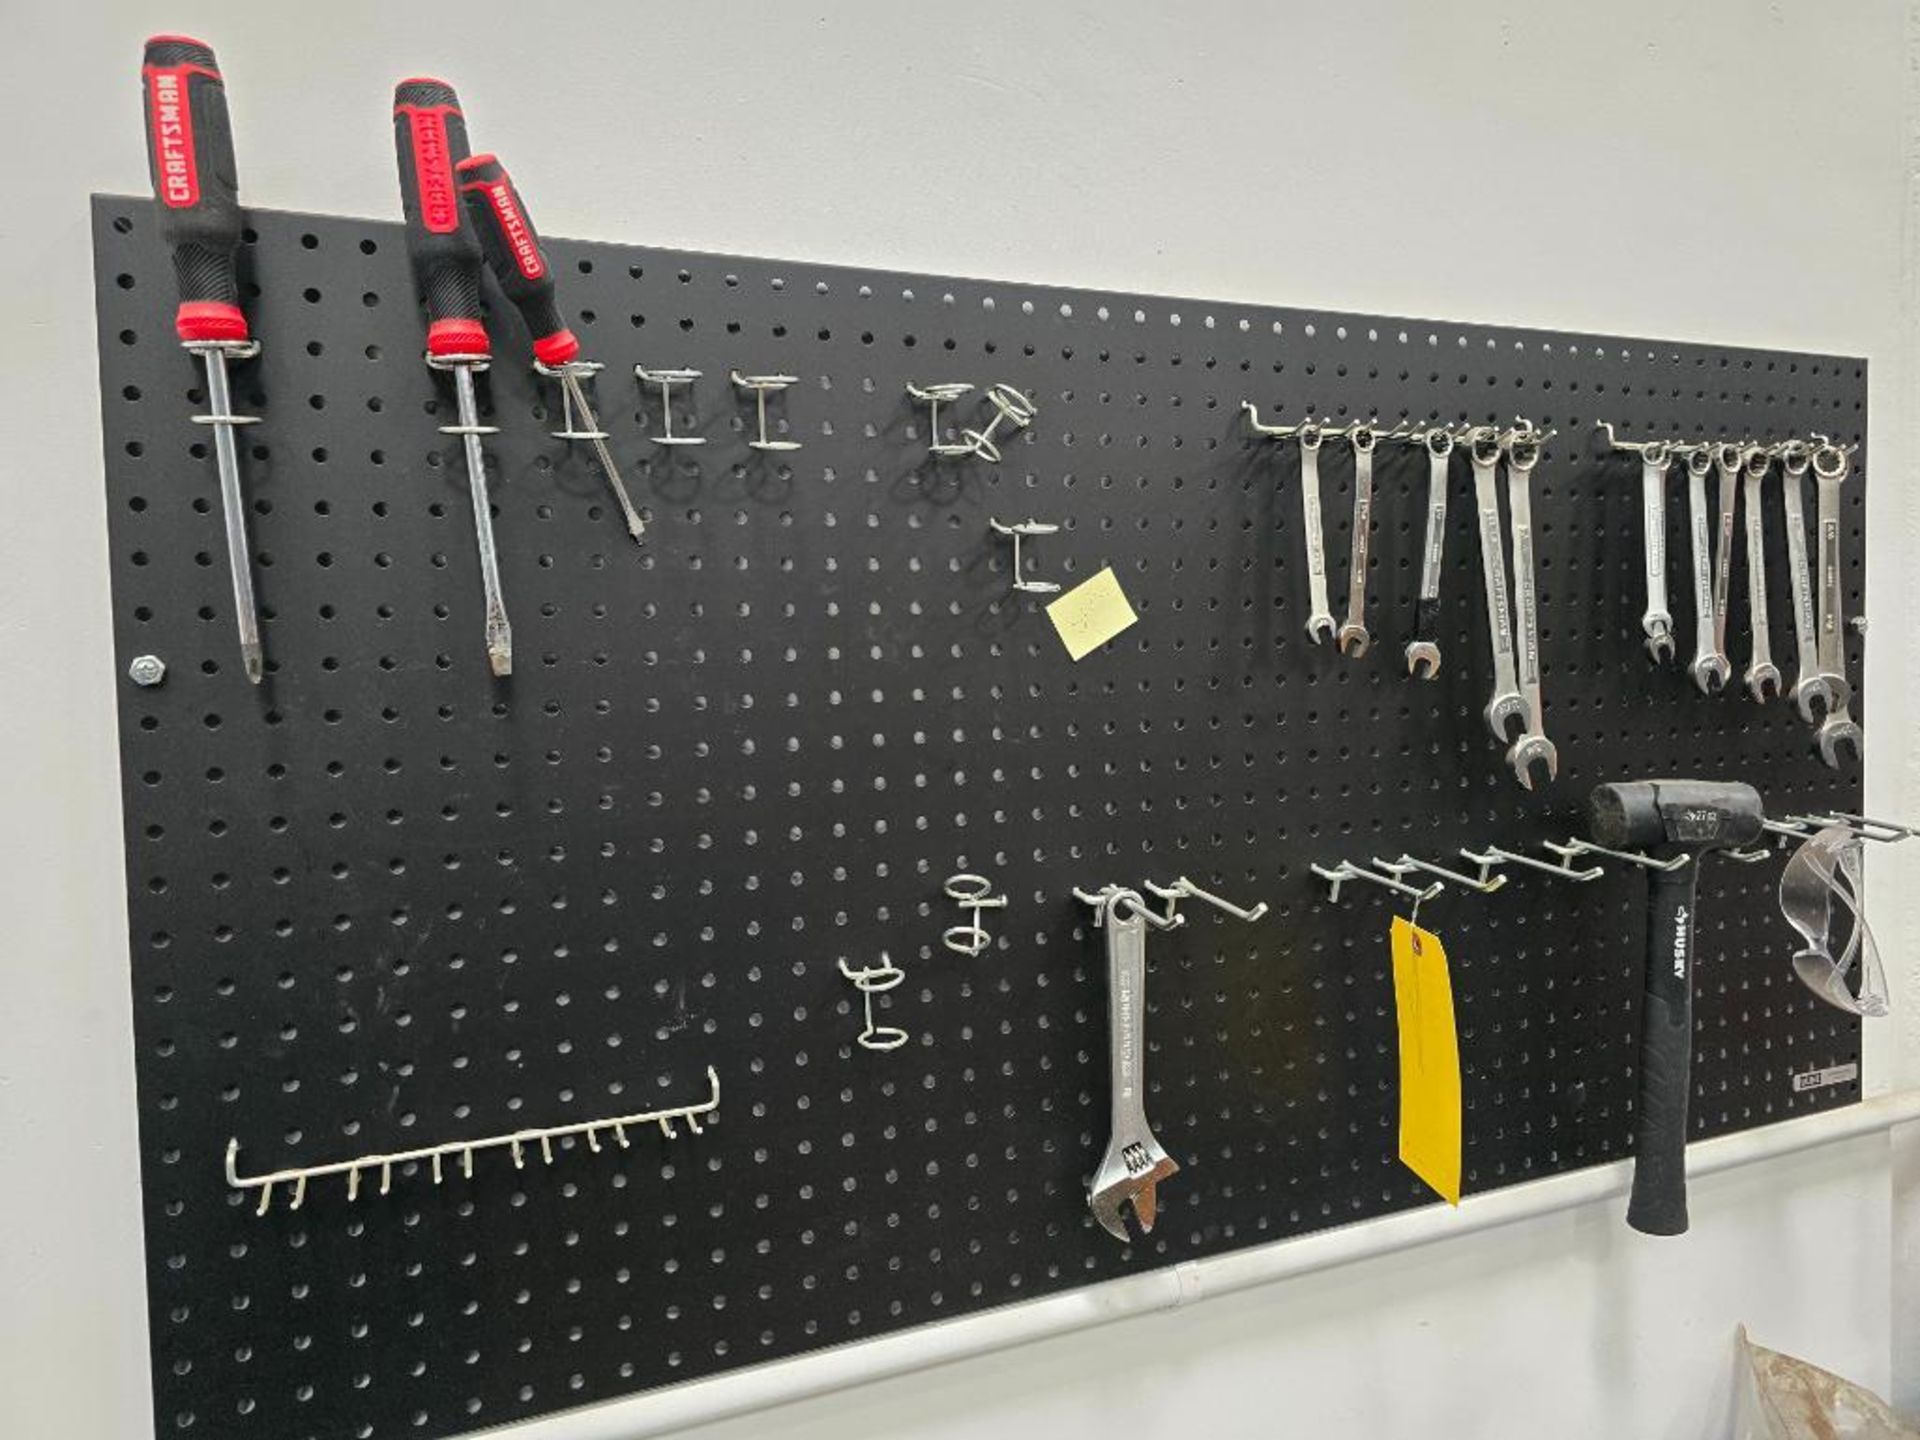 (3) 48" X 29" Metal Tables & Contents on Wall; Hand Saw, Knives, Eye Bolts, Wrenches, Mallet, Chalk - Image 5 of 8